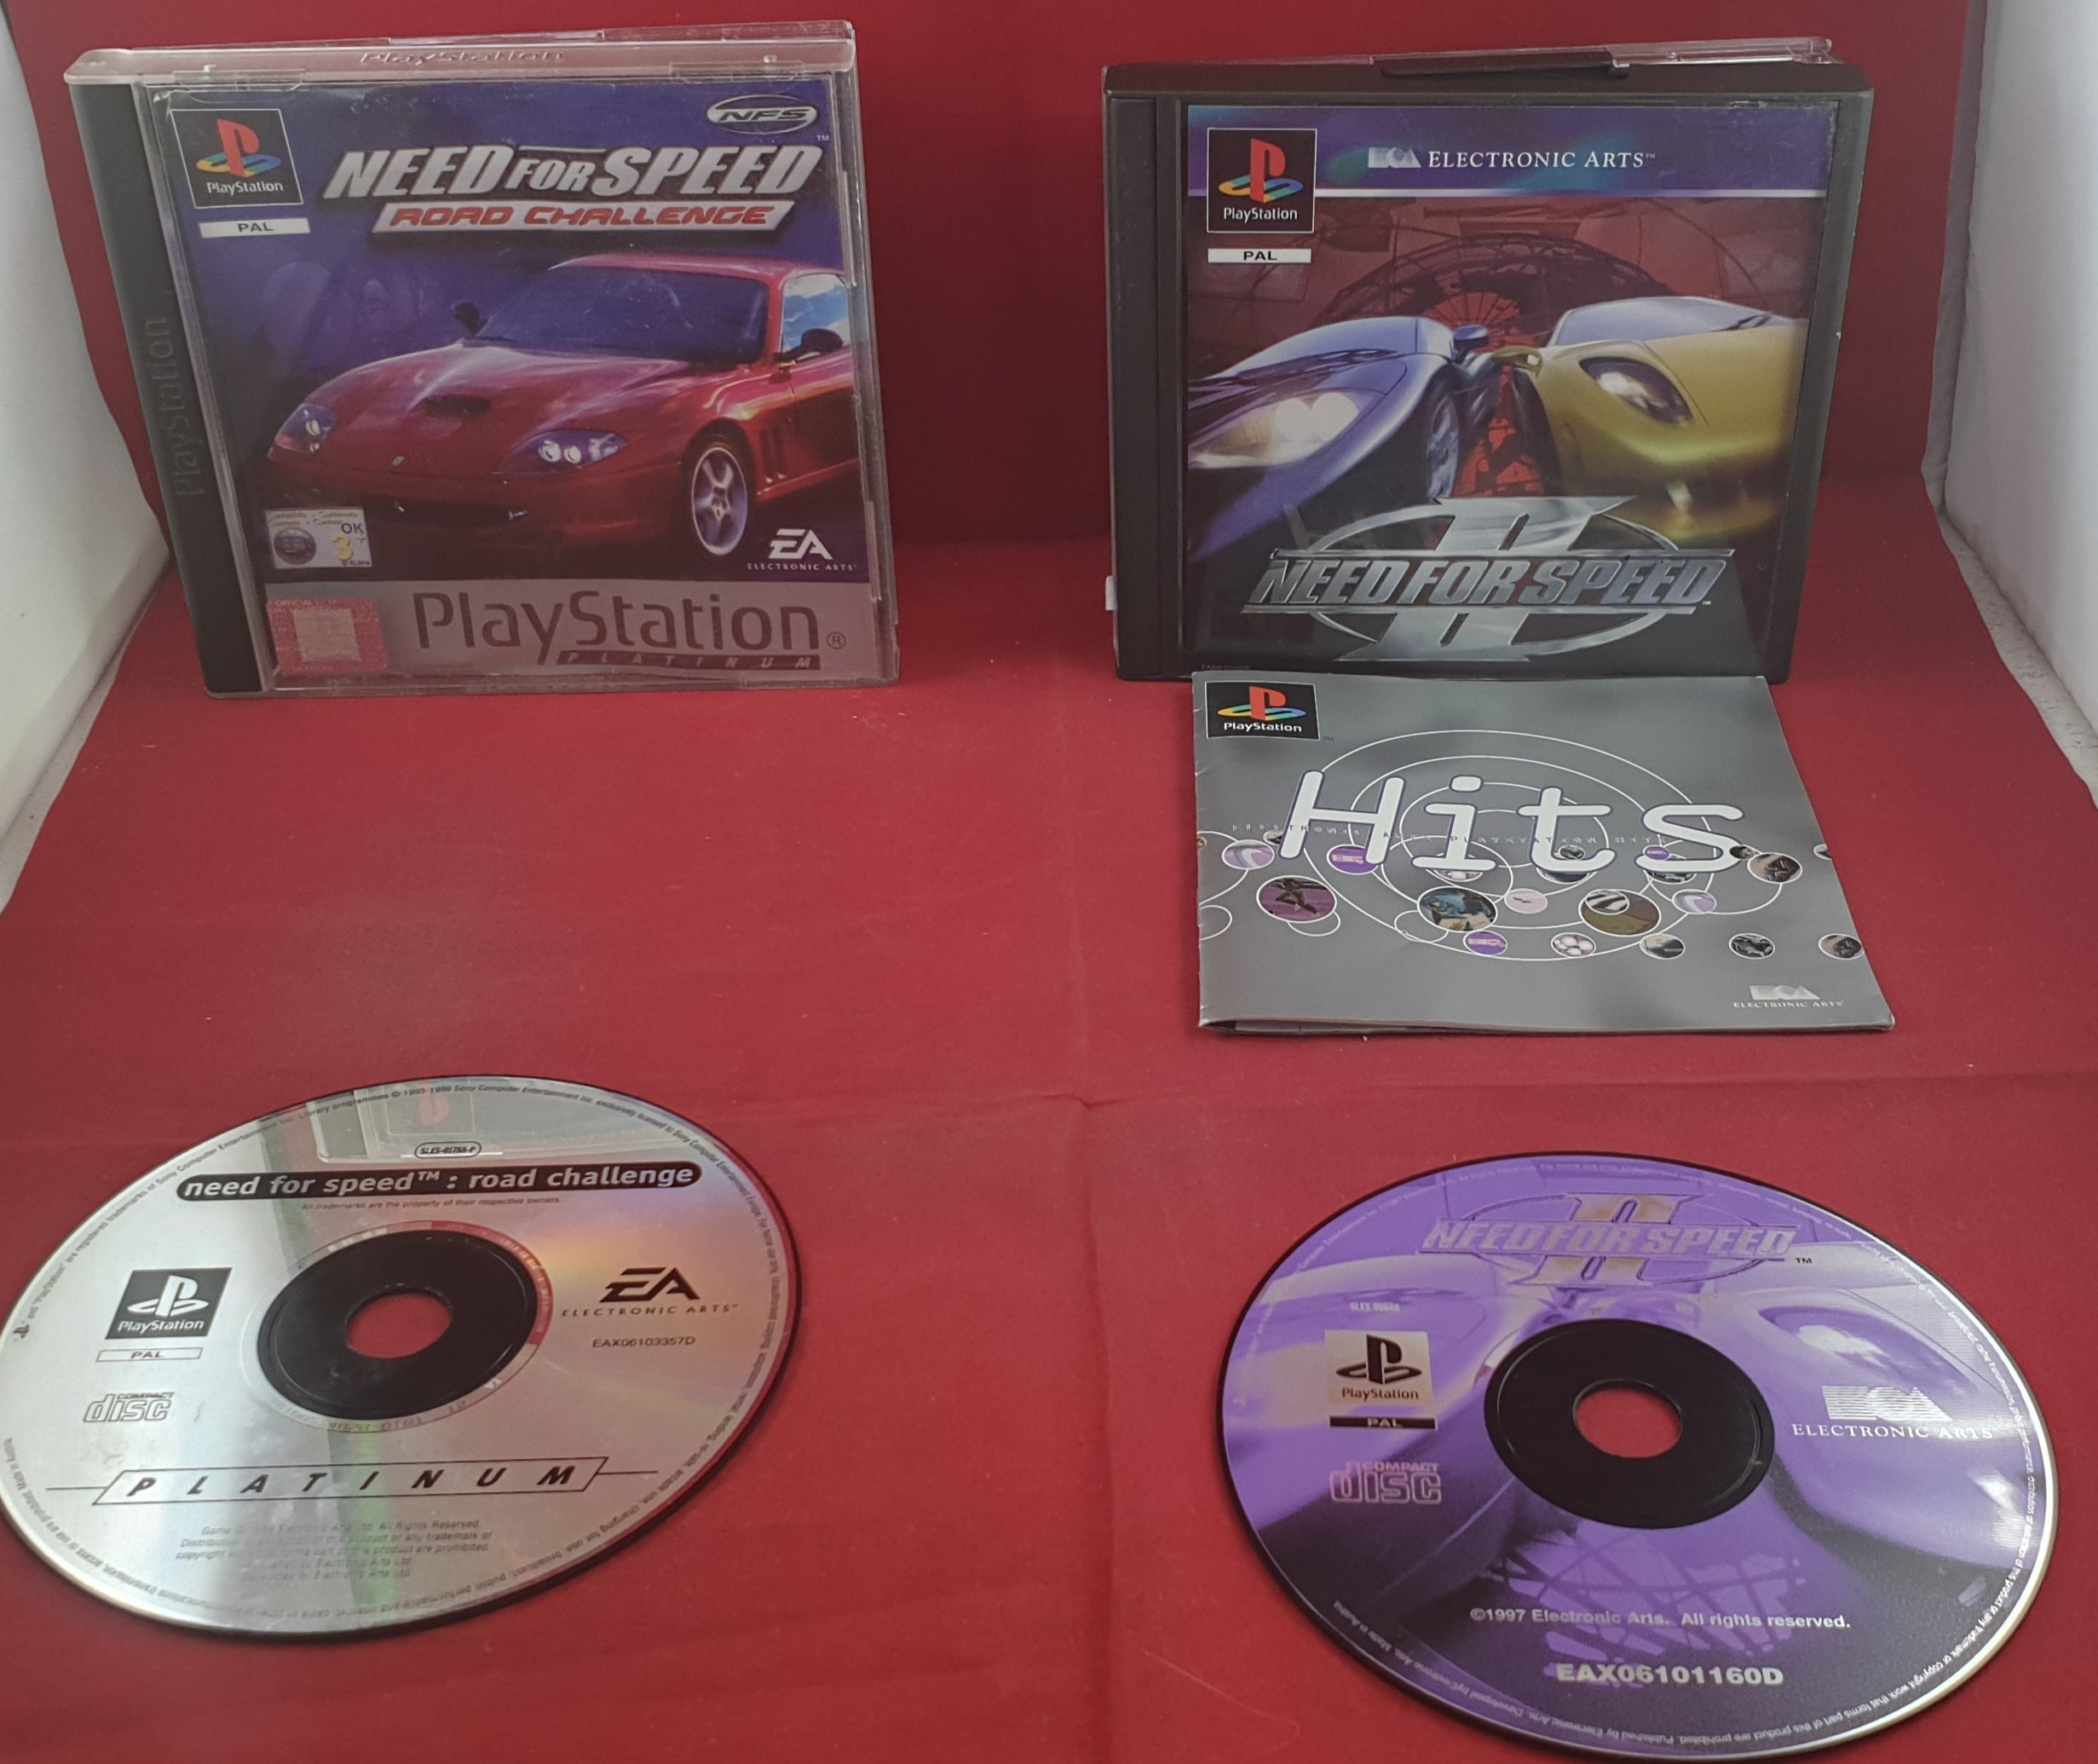 Need for Speed II & Road Challenge Sony Playstation 1 (PS1) Game Bundl ...